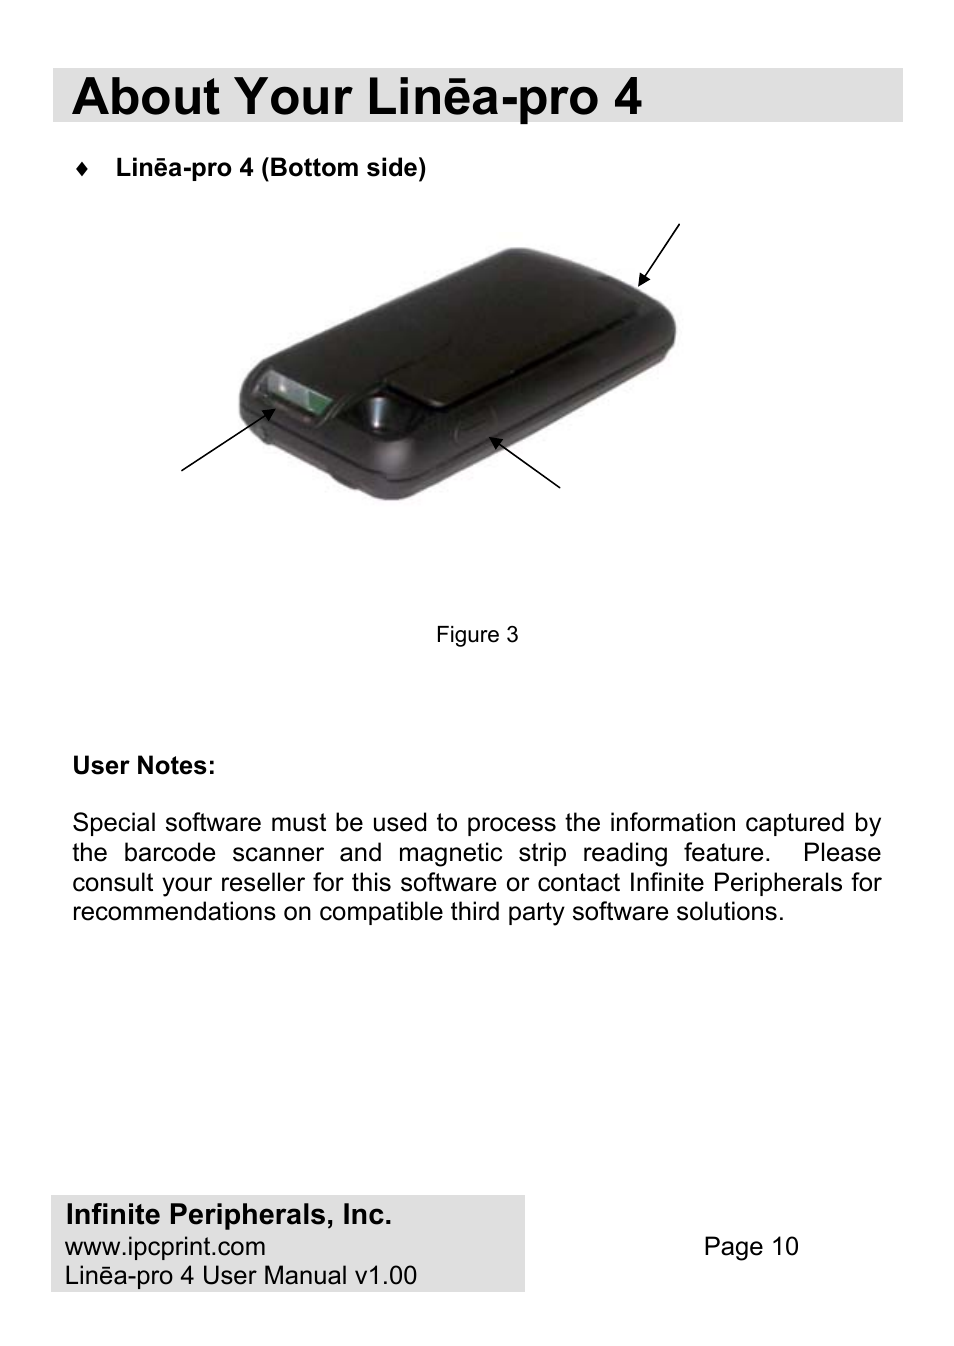 About your linēa-pro 4 | Infinite Peripherals PRO 4 User Manual | Page 10 / 24